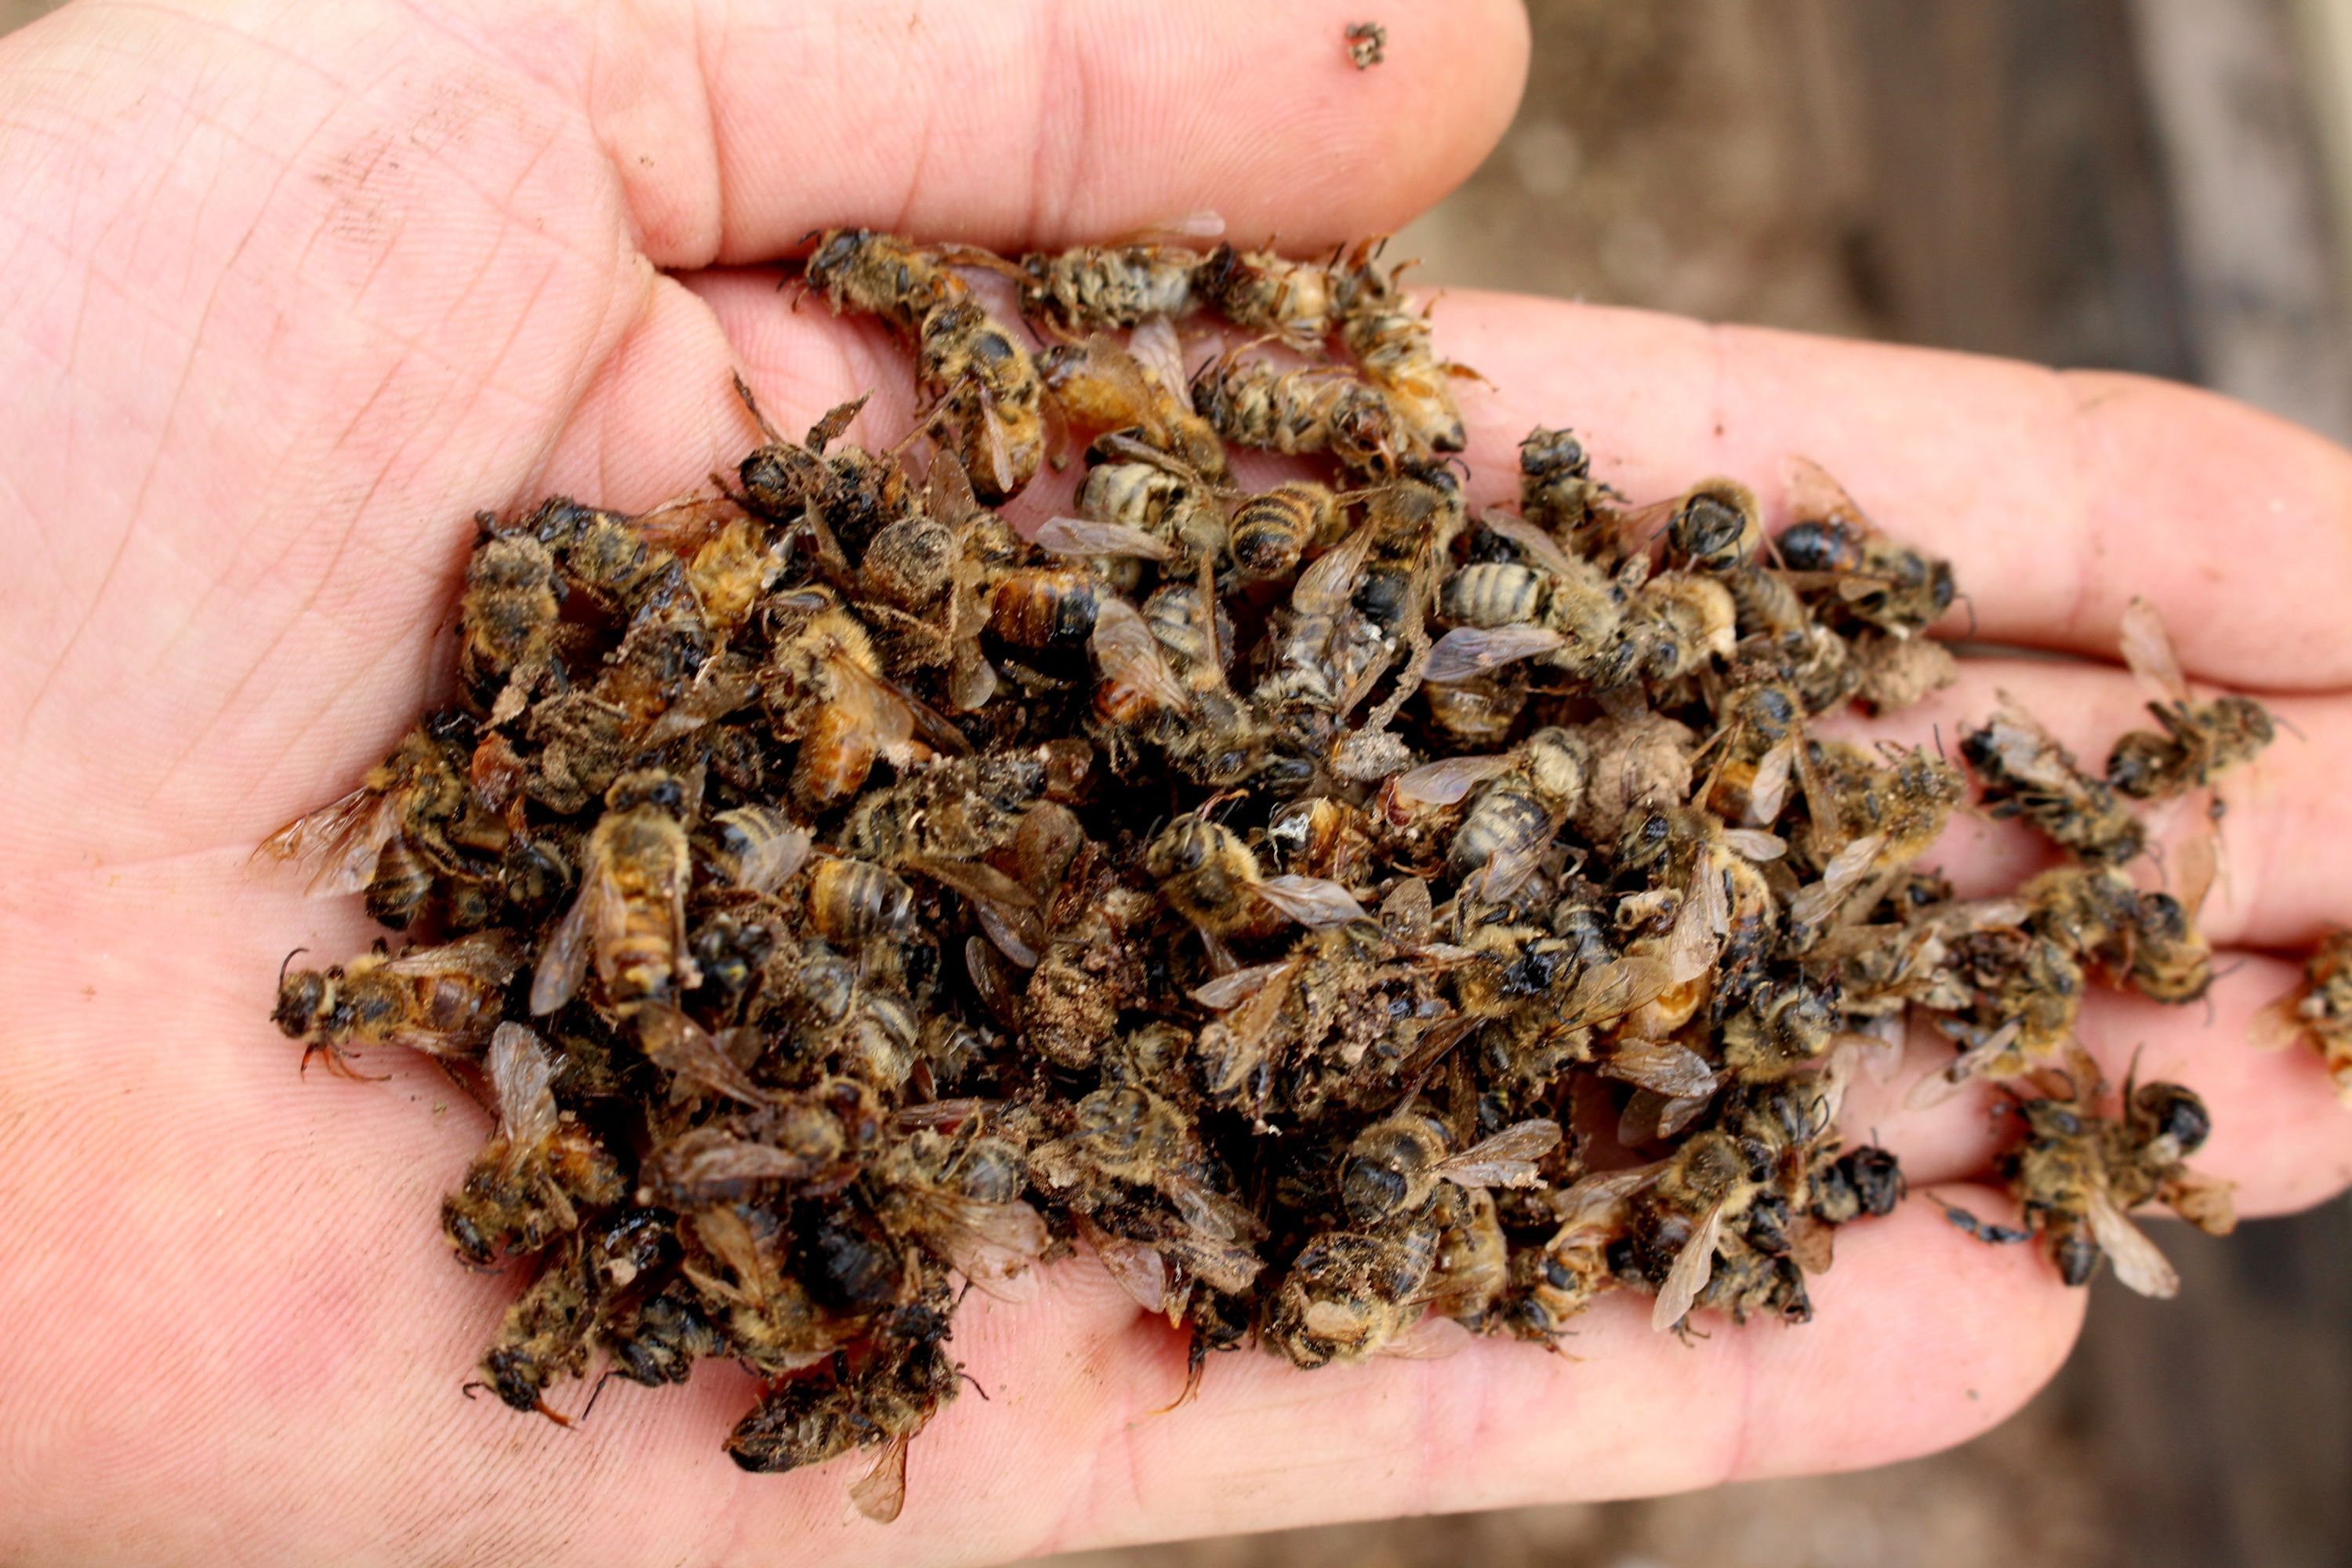 Pesticide killed bees in hand